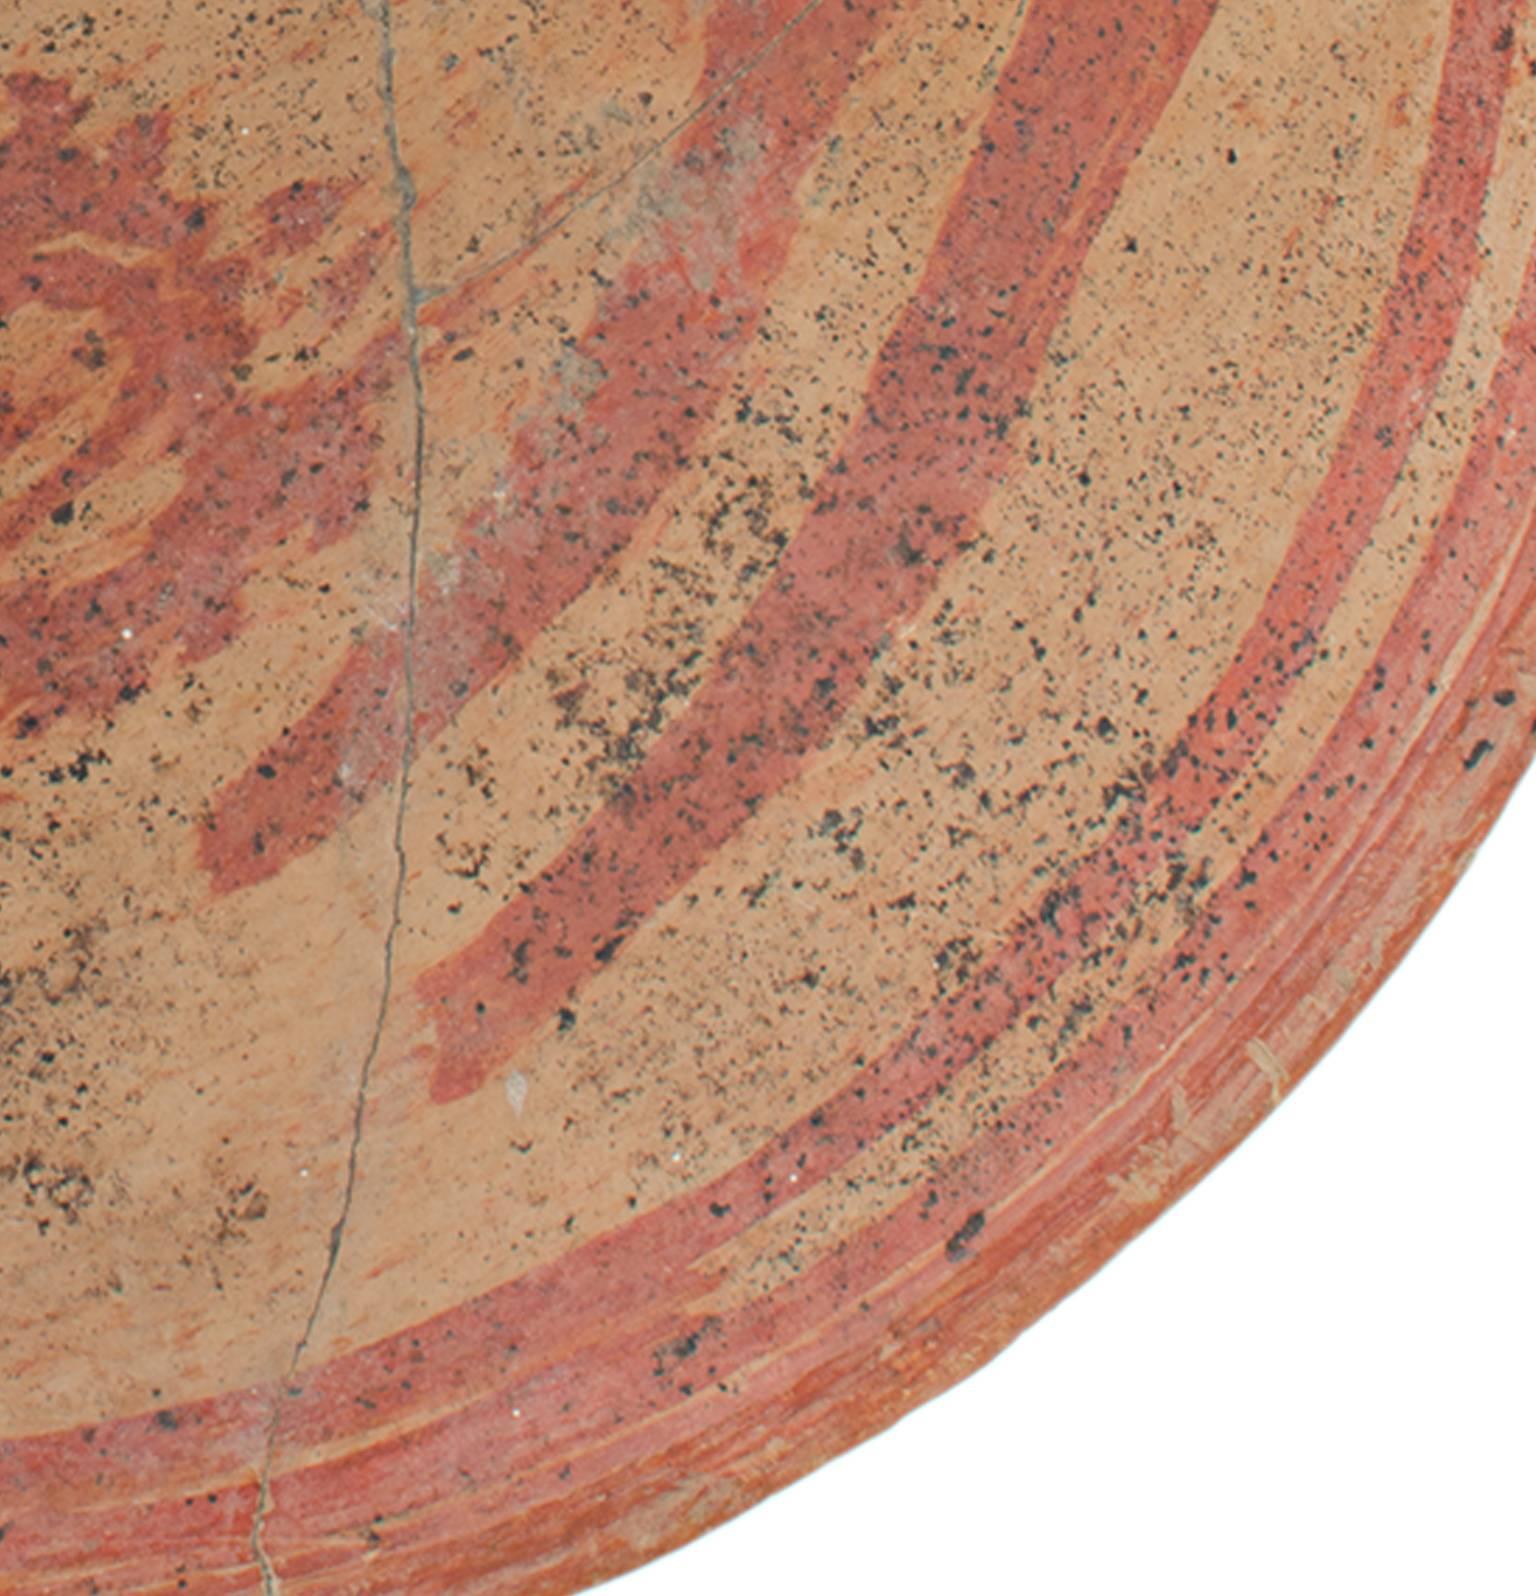 This Pre-Columbian bowl featuers red marks on a light orange ground. It is 9